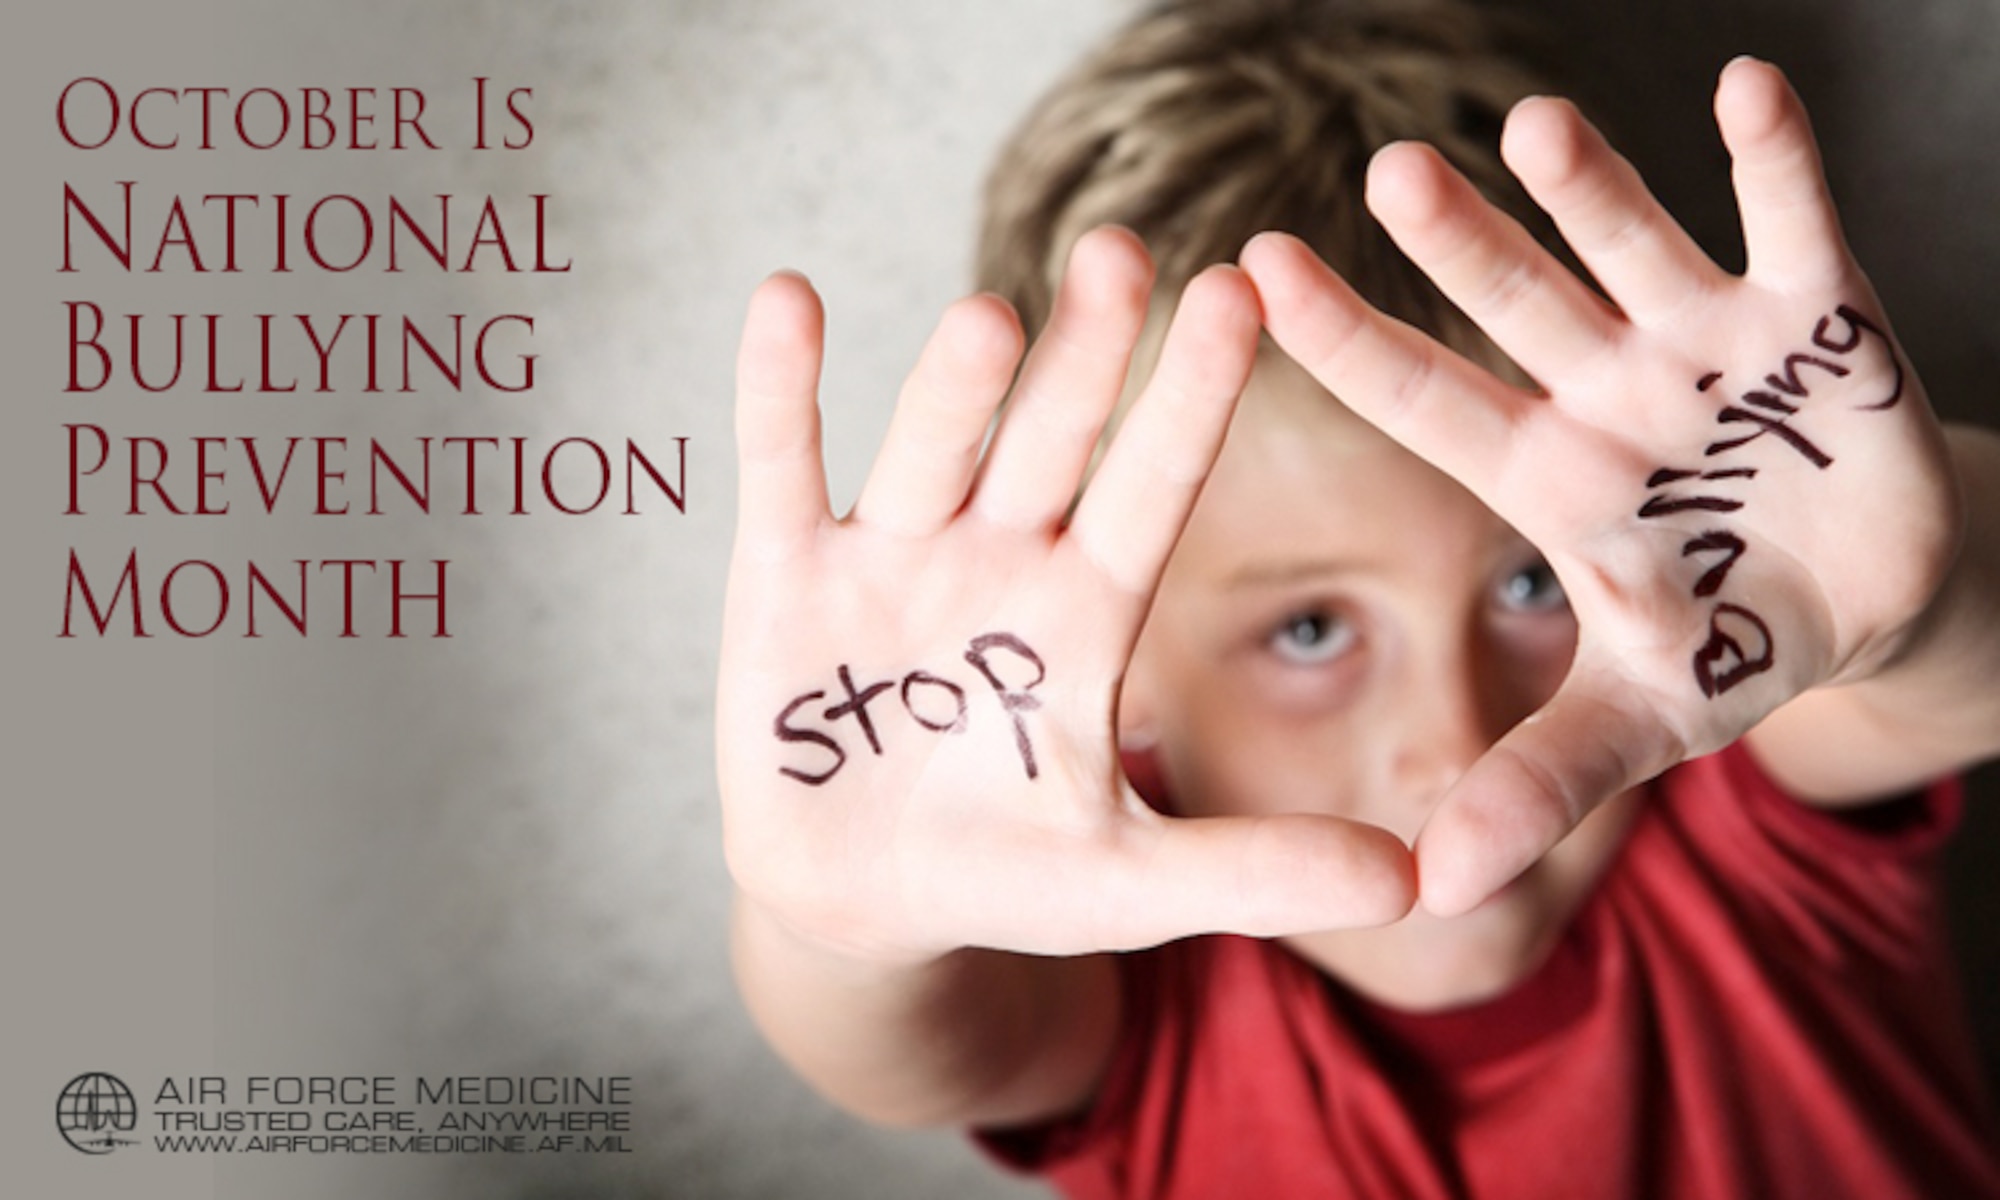 October is National Bullying Prevention Month.